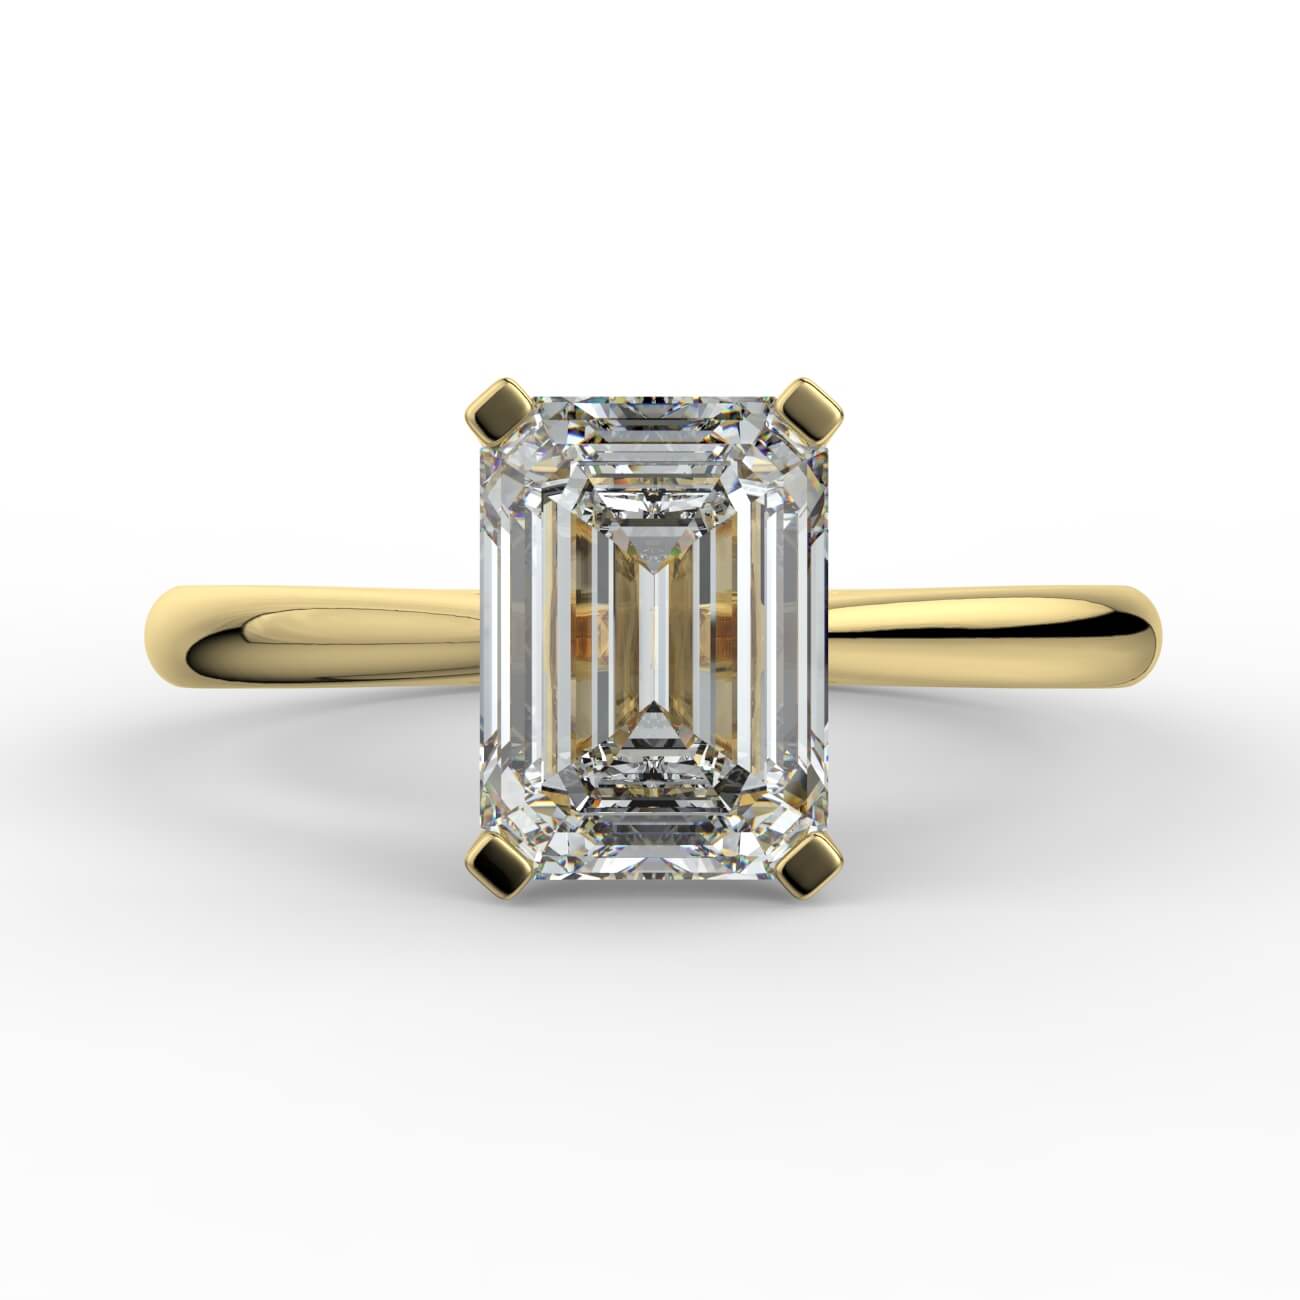 Emerald cut diamond cathedral engagement ring in yellow gold – Australian Diamond Network